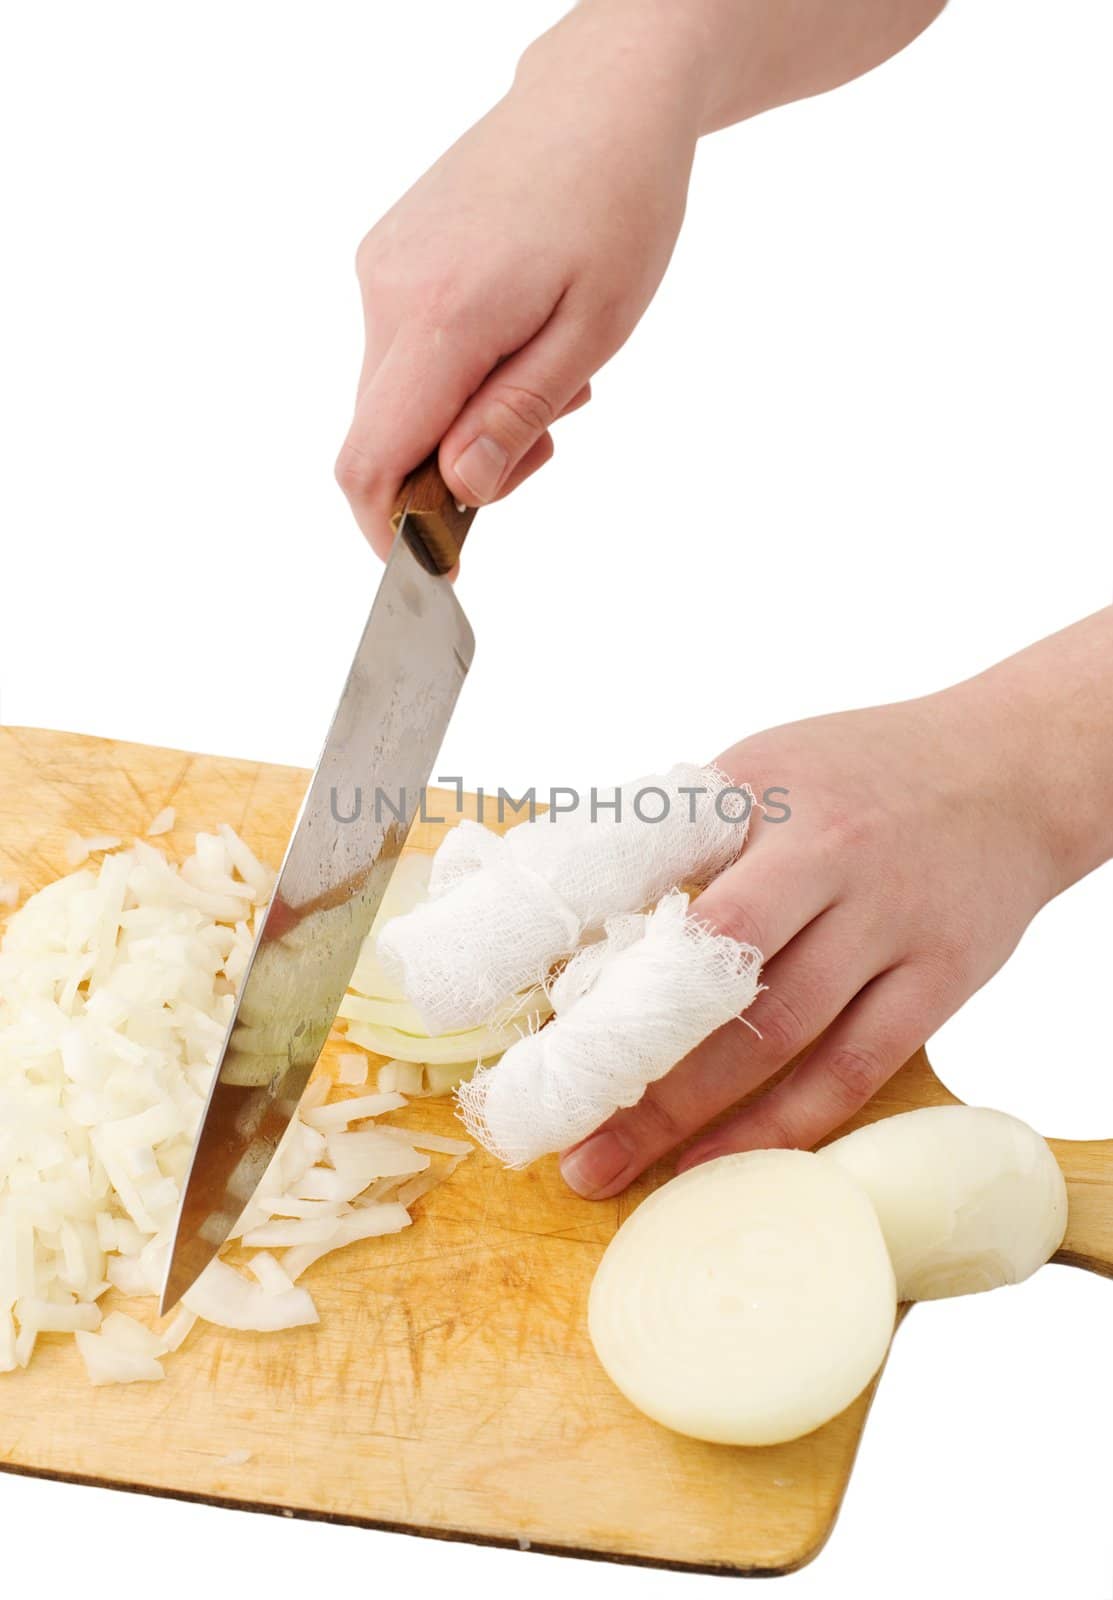 The hands, cutting onions on a chopping board